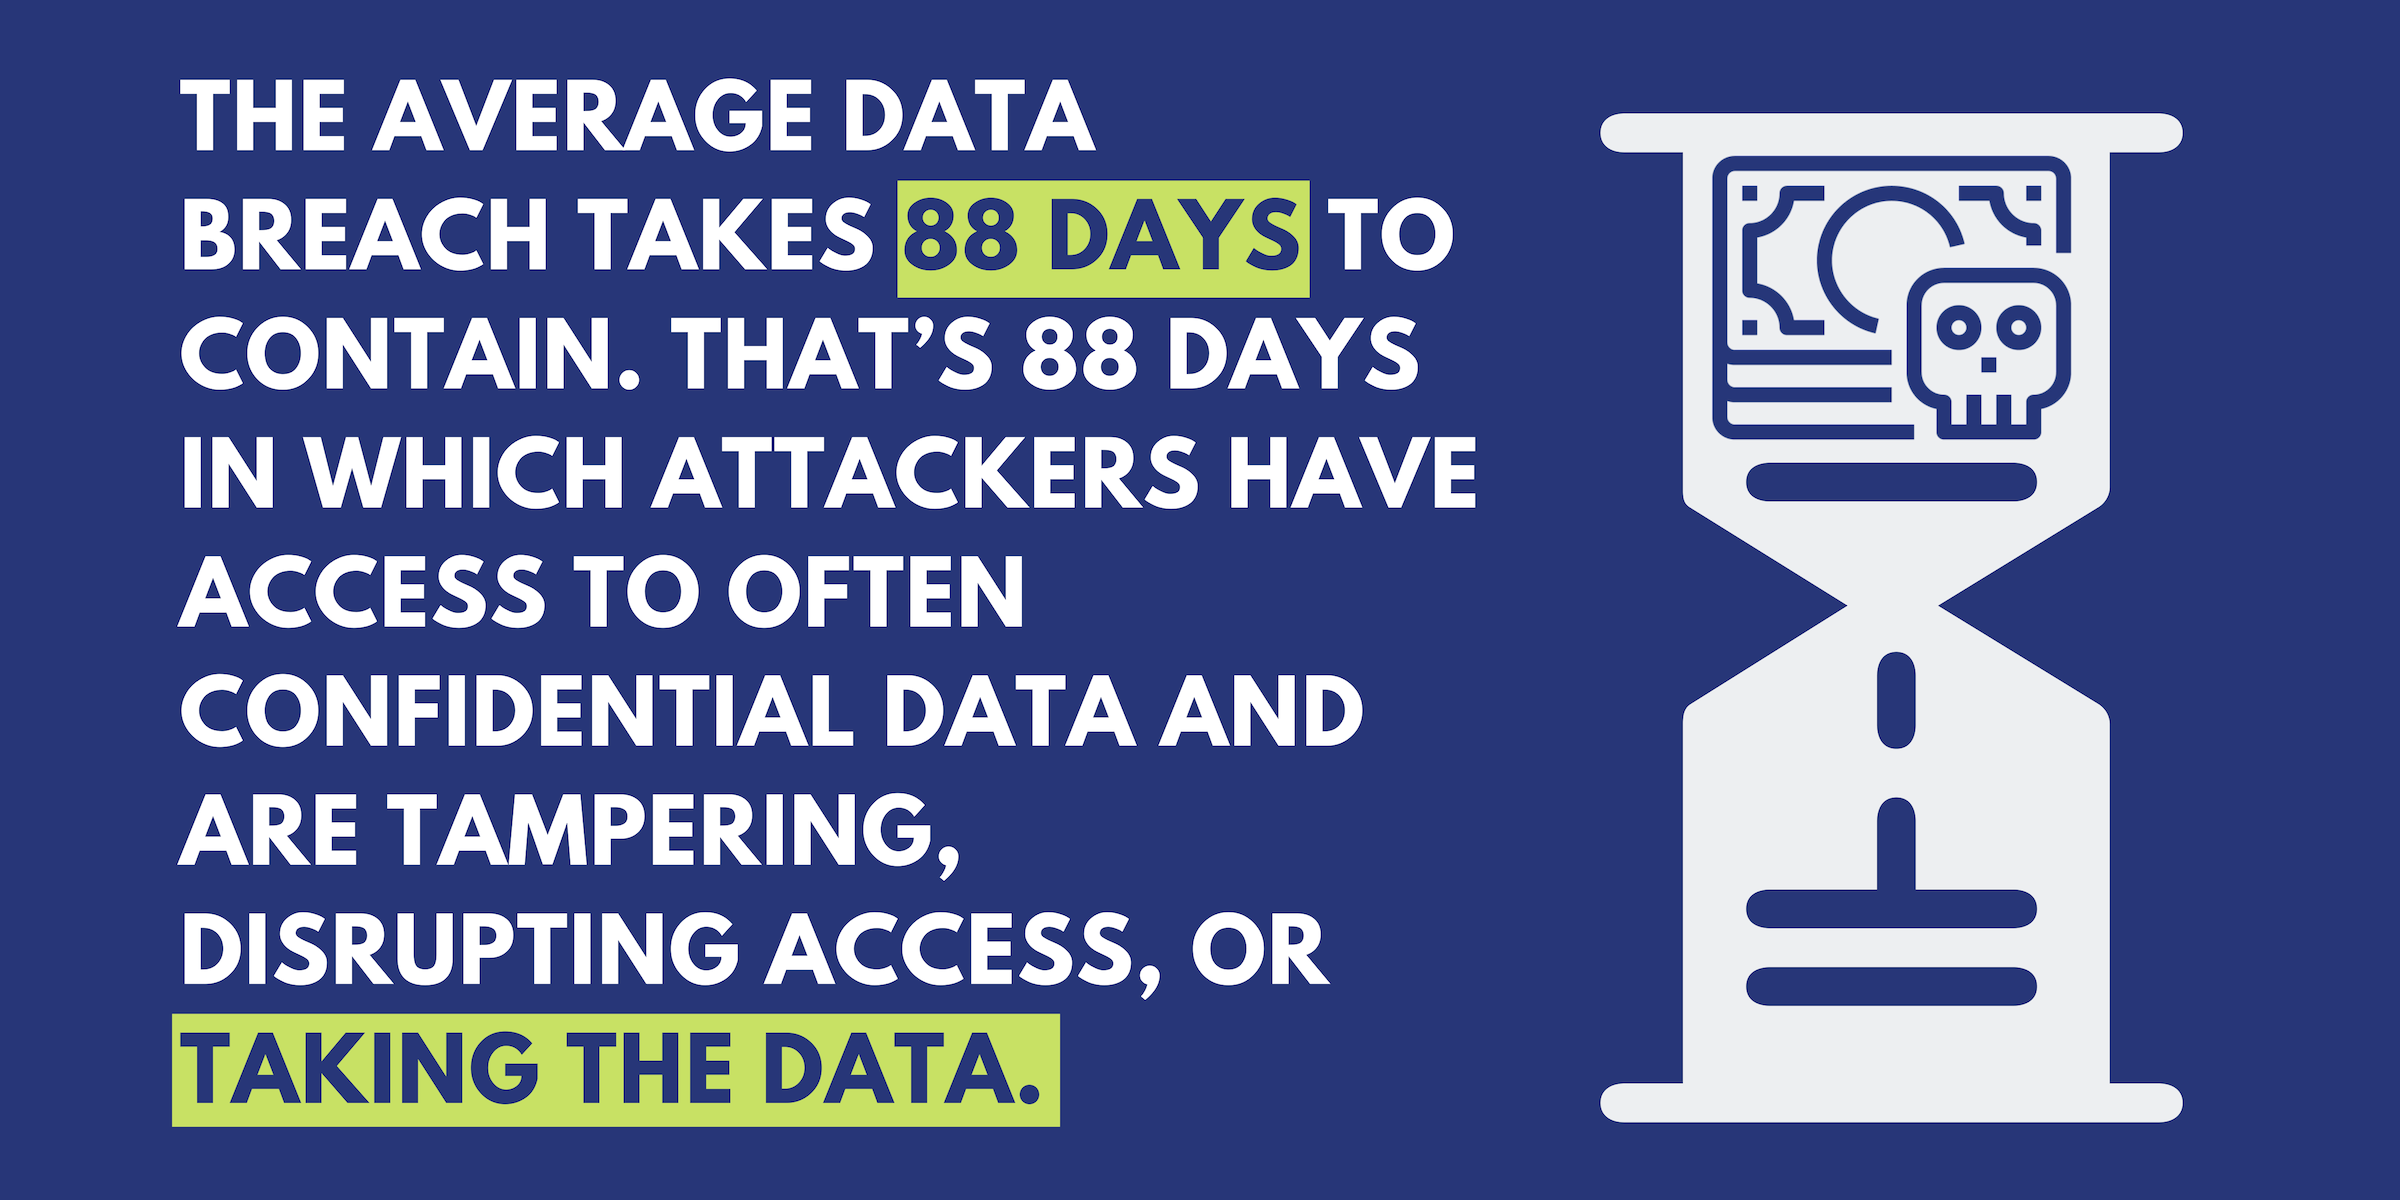 The average data breach takes 88 days to contain. That's 88 days in which attackers have access to often confidential data and are tampering, disrupting access, or taking the data.